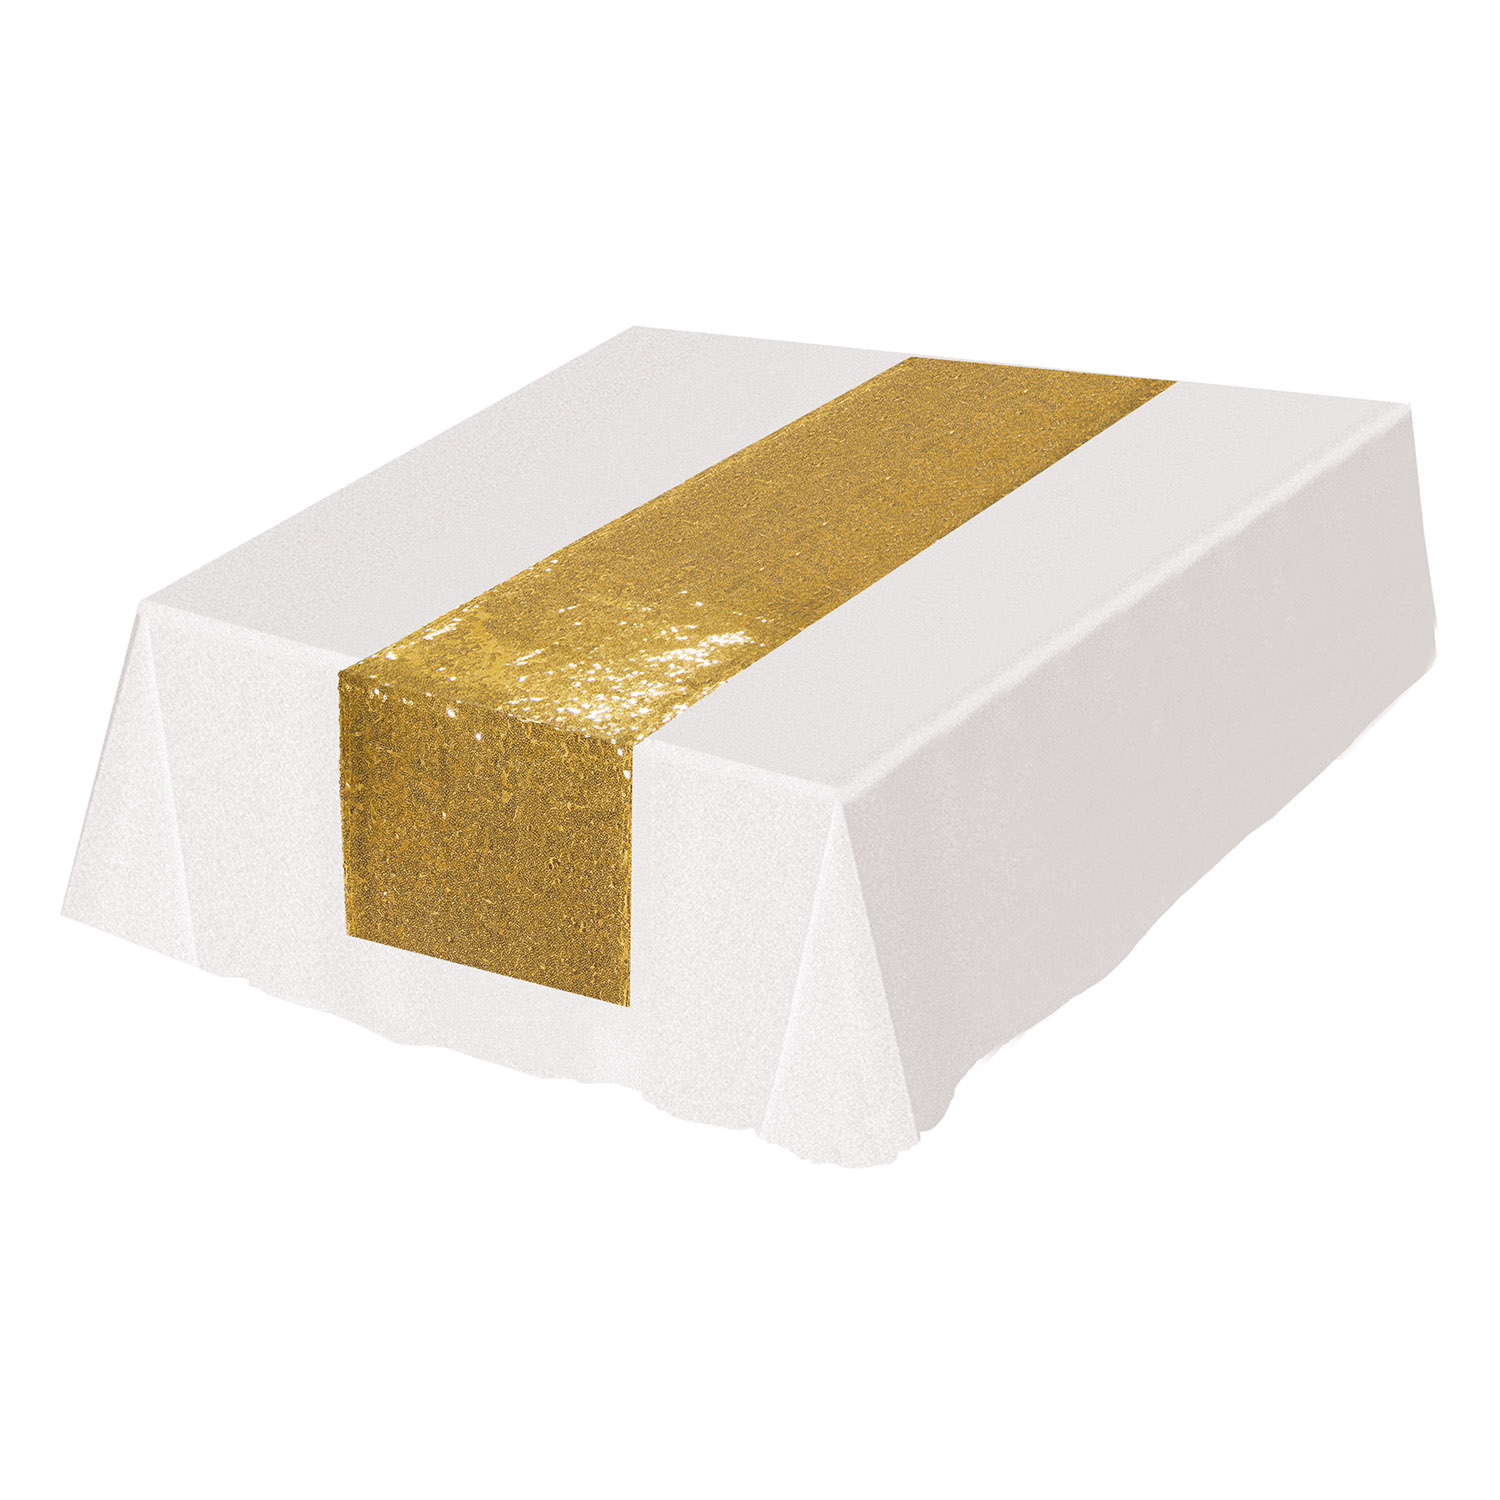 Beistle Club Pack of 12 Sparkling Gold Sequined Table Runner 6' L